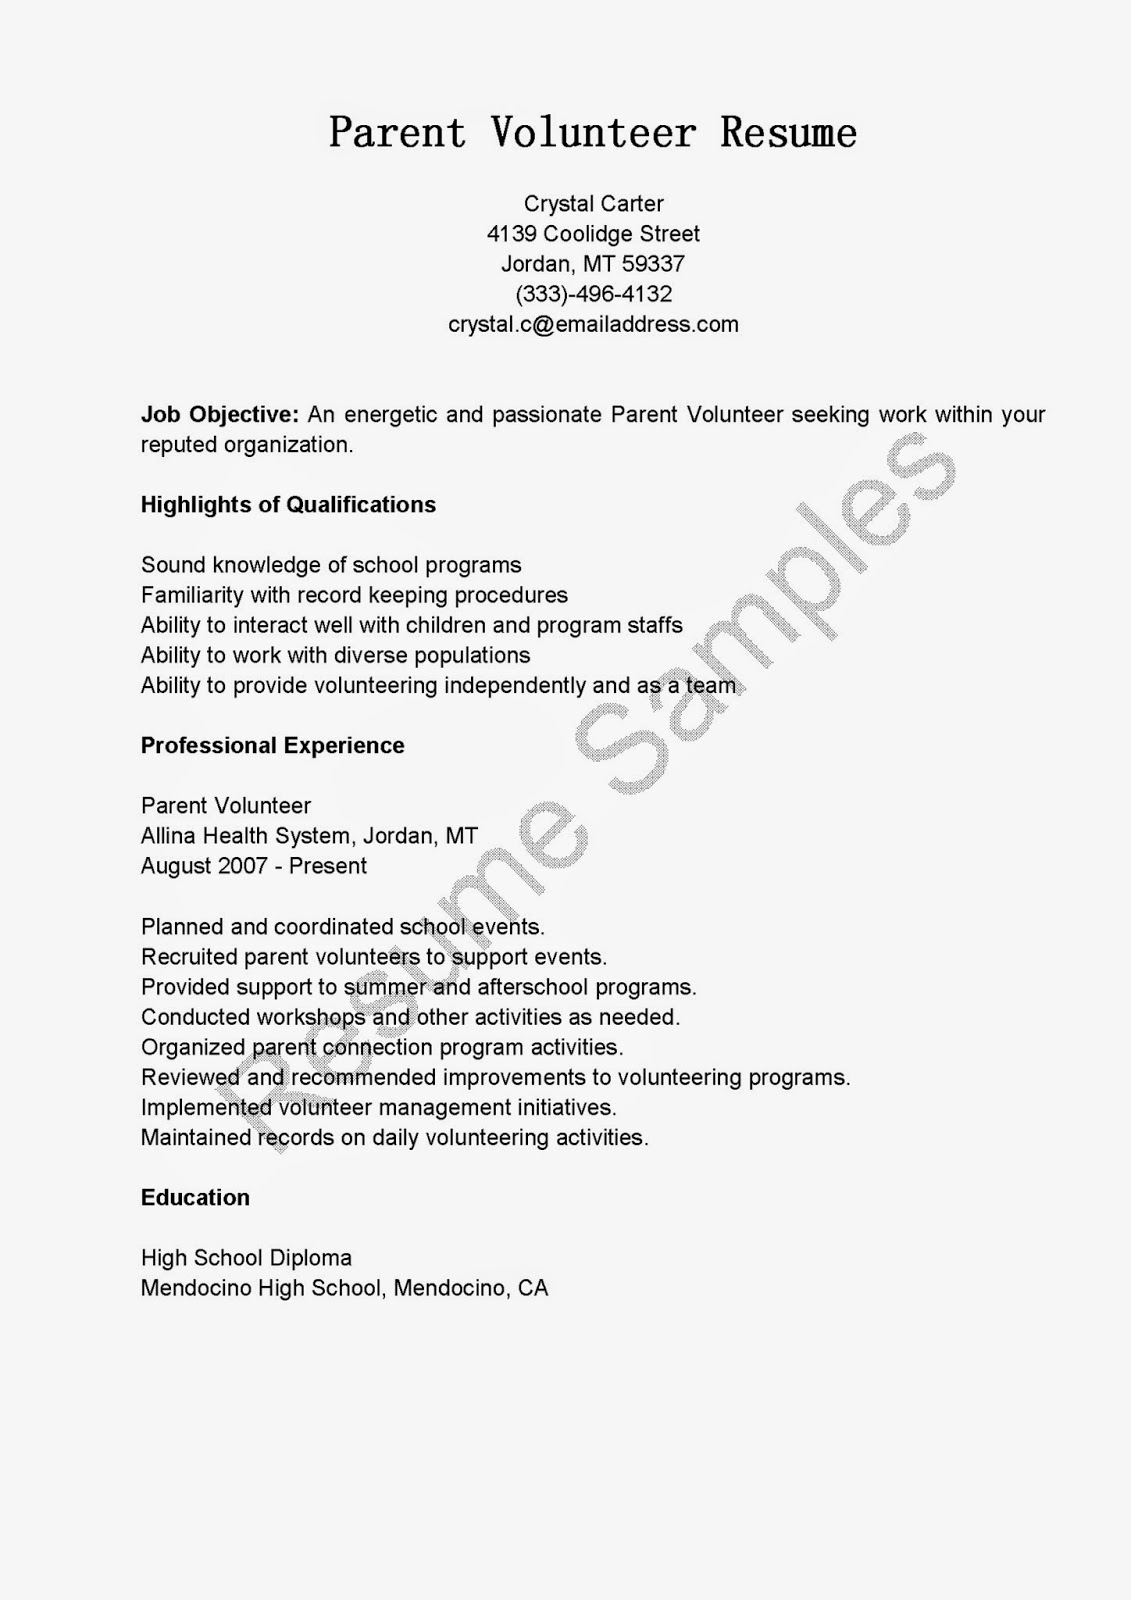 Resume sample with volunteer position